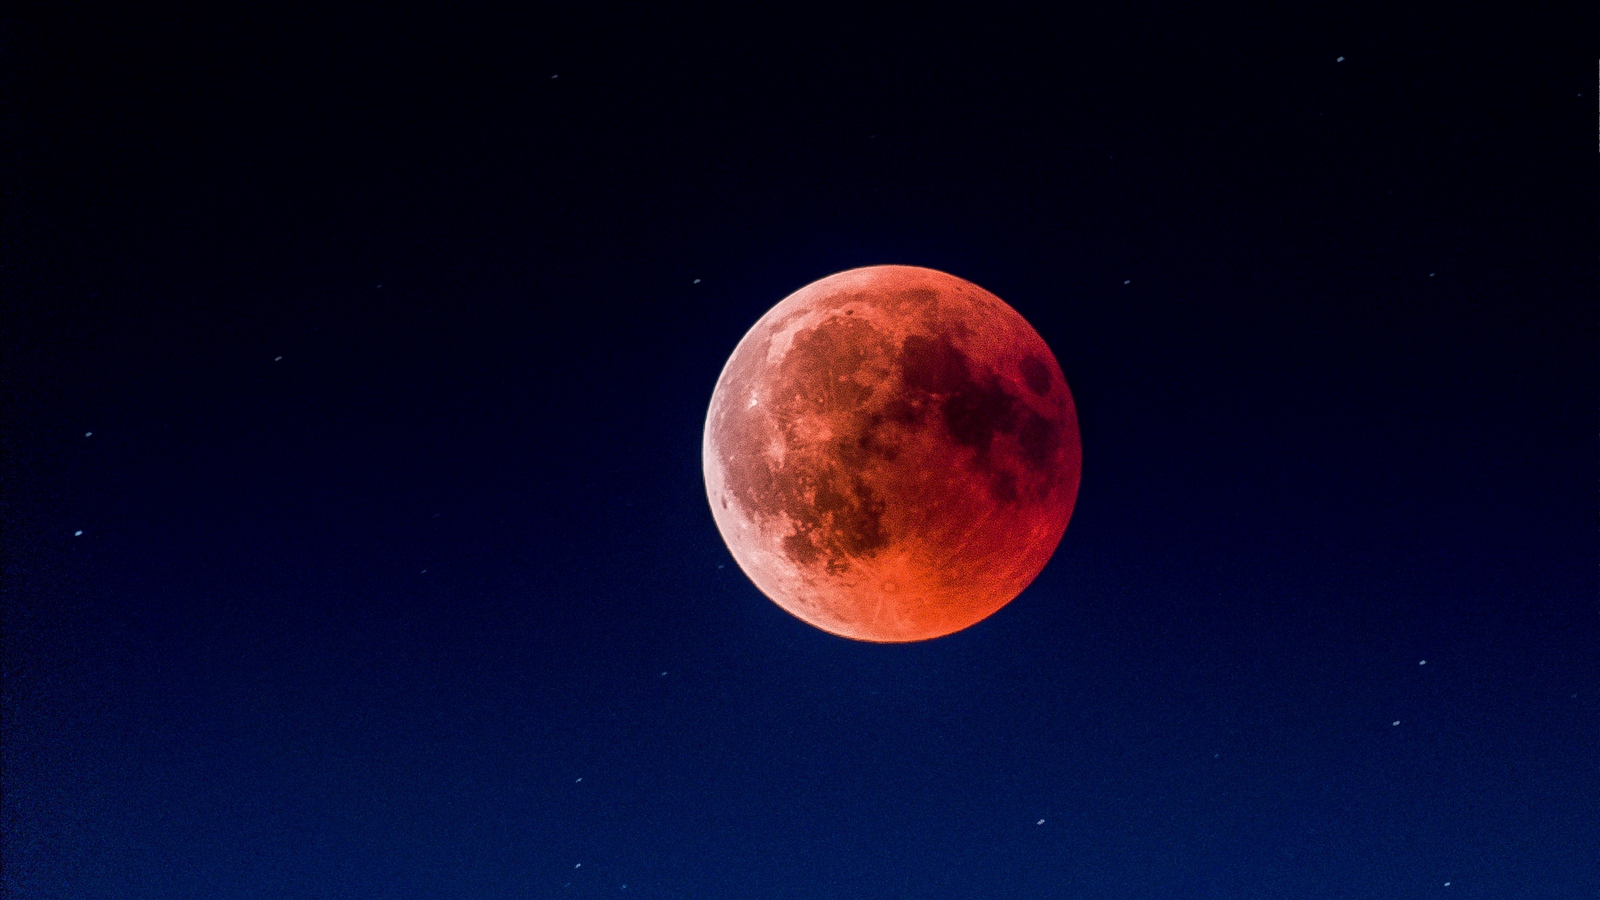 Wallpaper Full Moon, Red Moon, Eclipse, Bloody Moon - Full Moon Hd Images Download - HD Wallpaper 